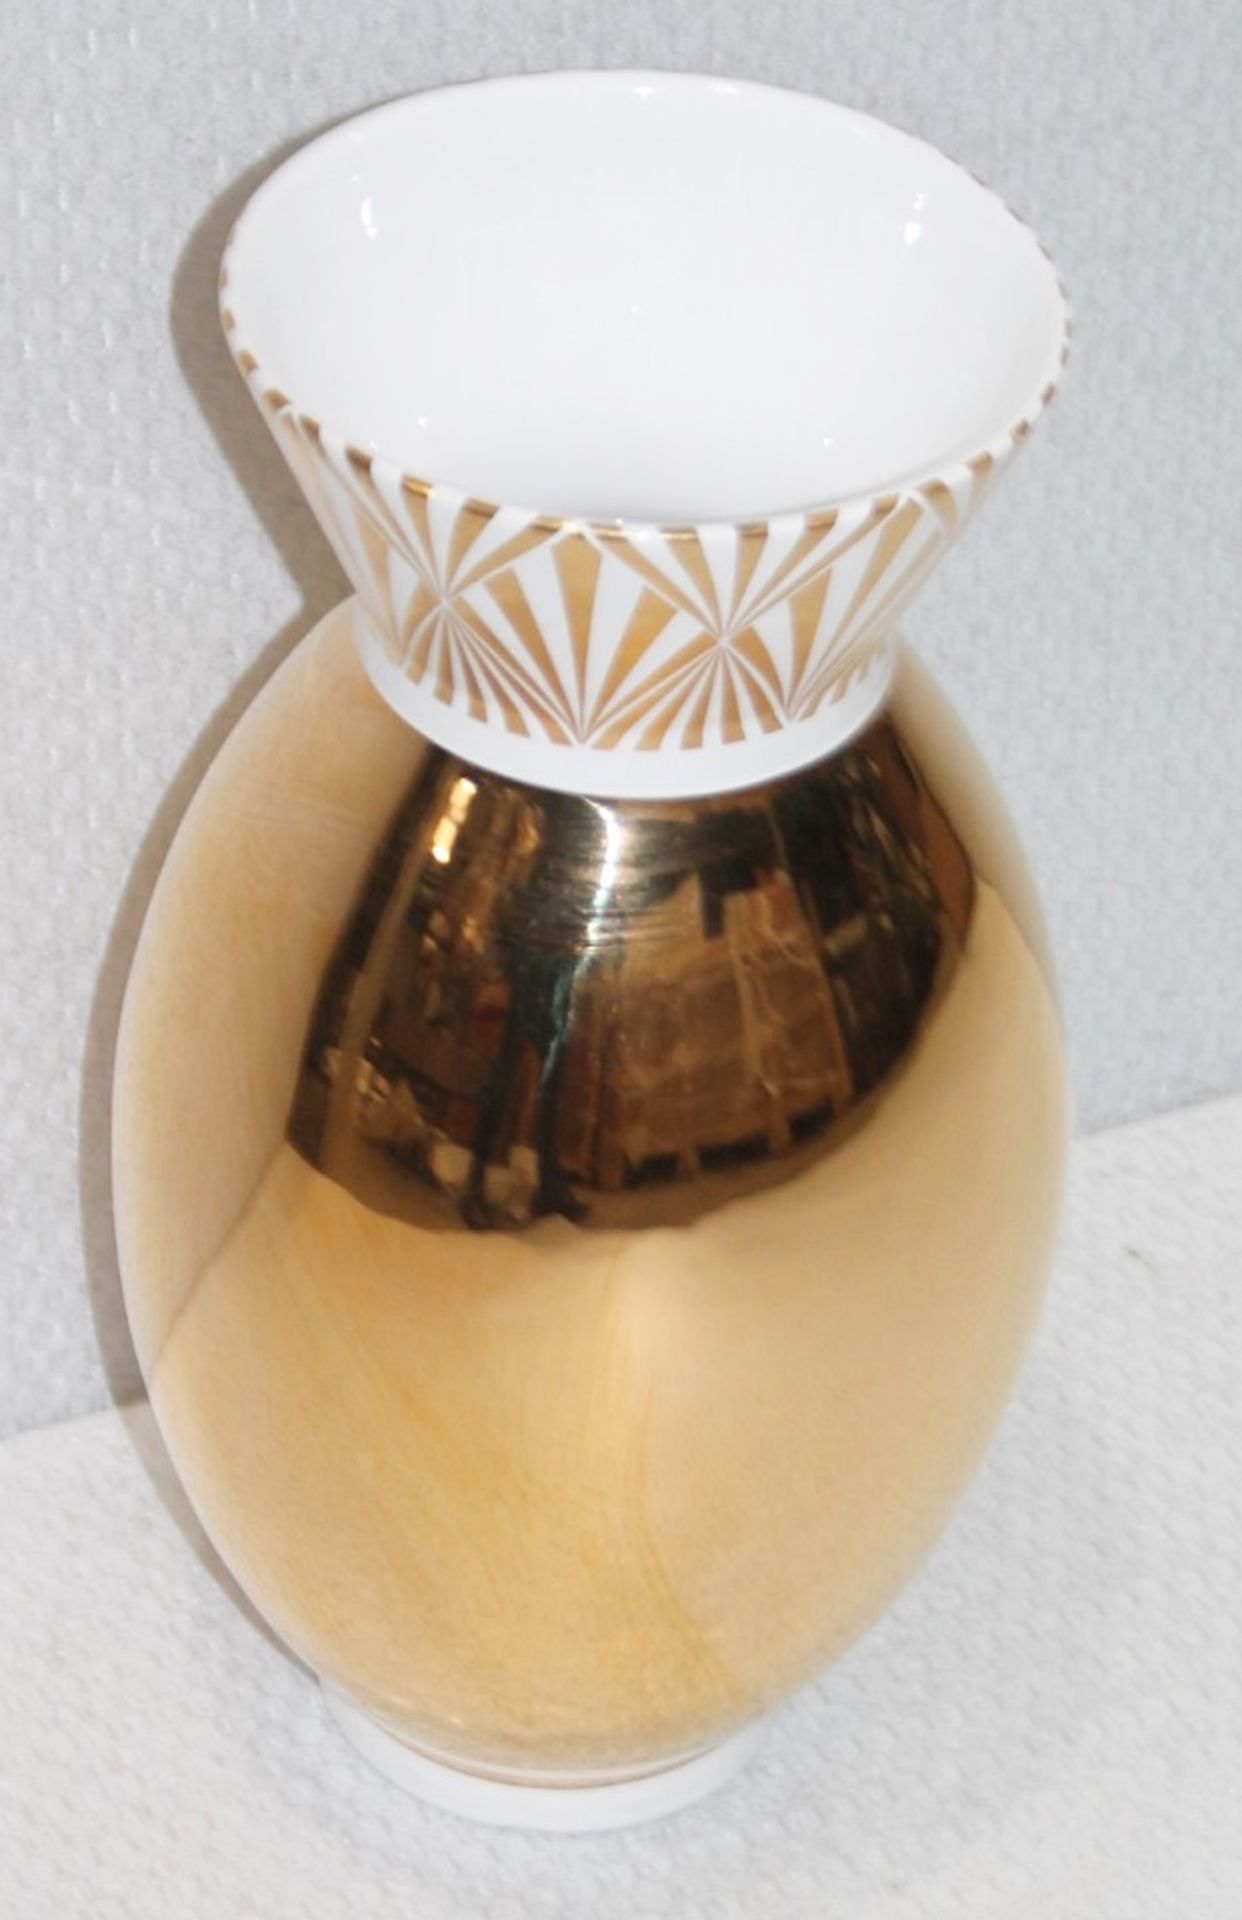 1 x VISIONNAIRE Large Luxury Vase Featuring An Art Deco Aesthetic And Gold Finish - Ref: HAS1588 - Image 2 of 3